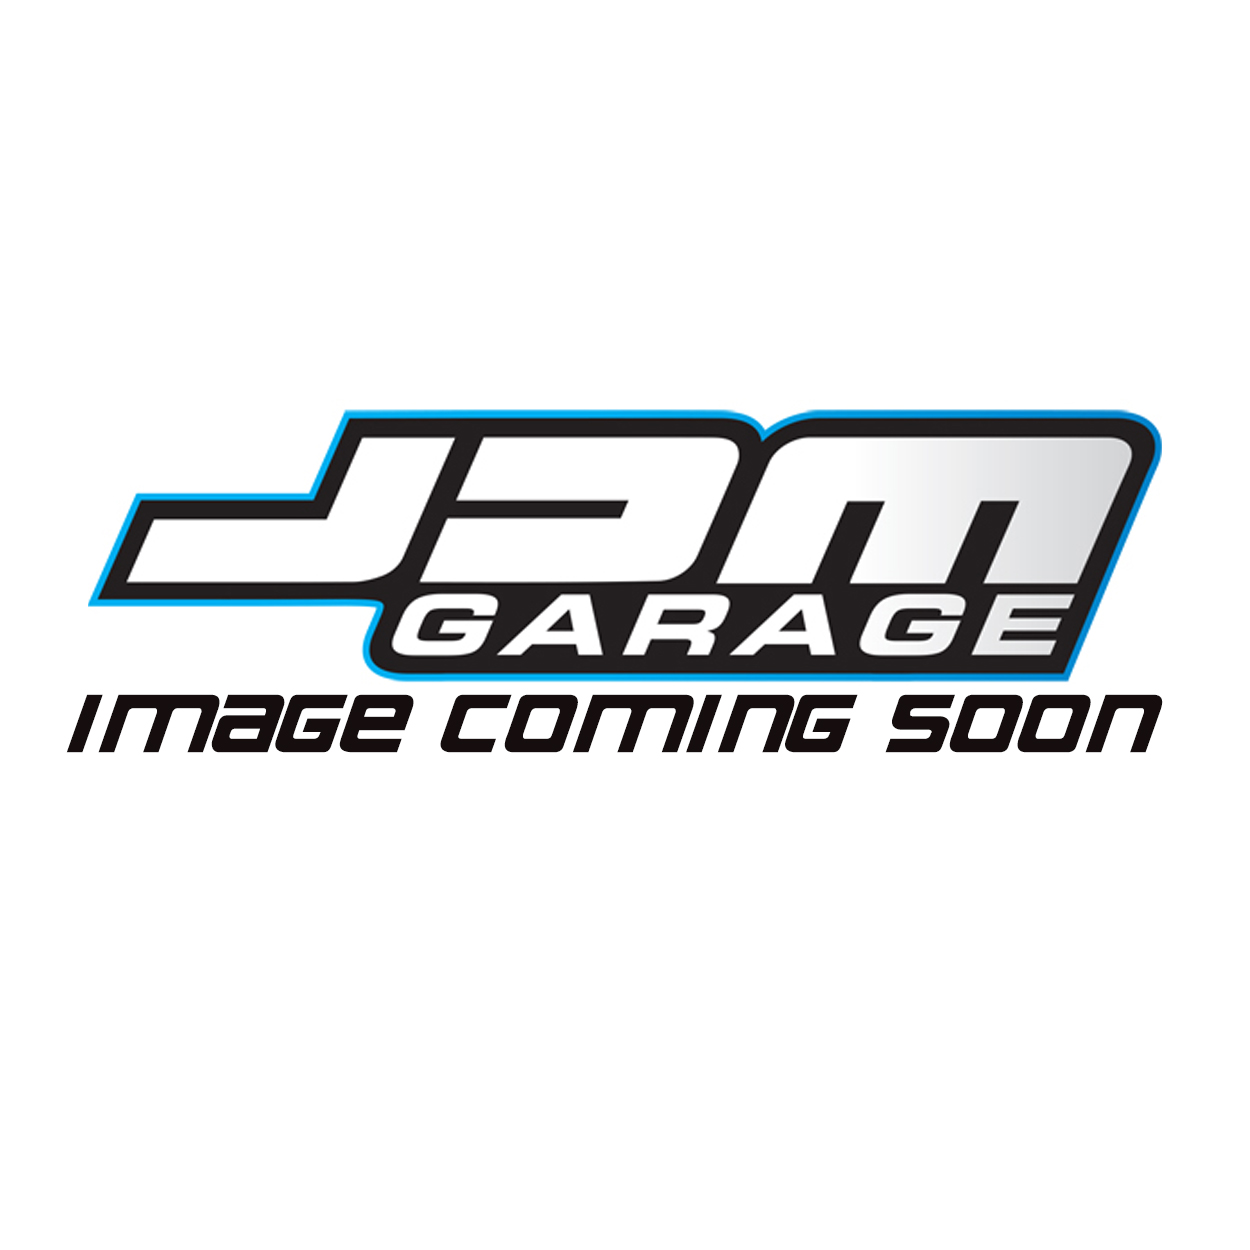 OE Replacement Rear Brake Discs - Toyota Chaser JZX100 JZX110